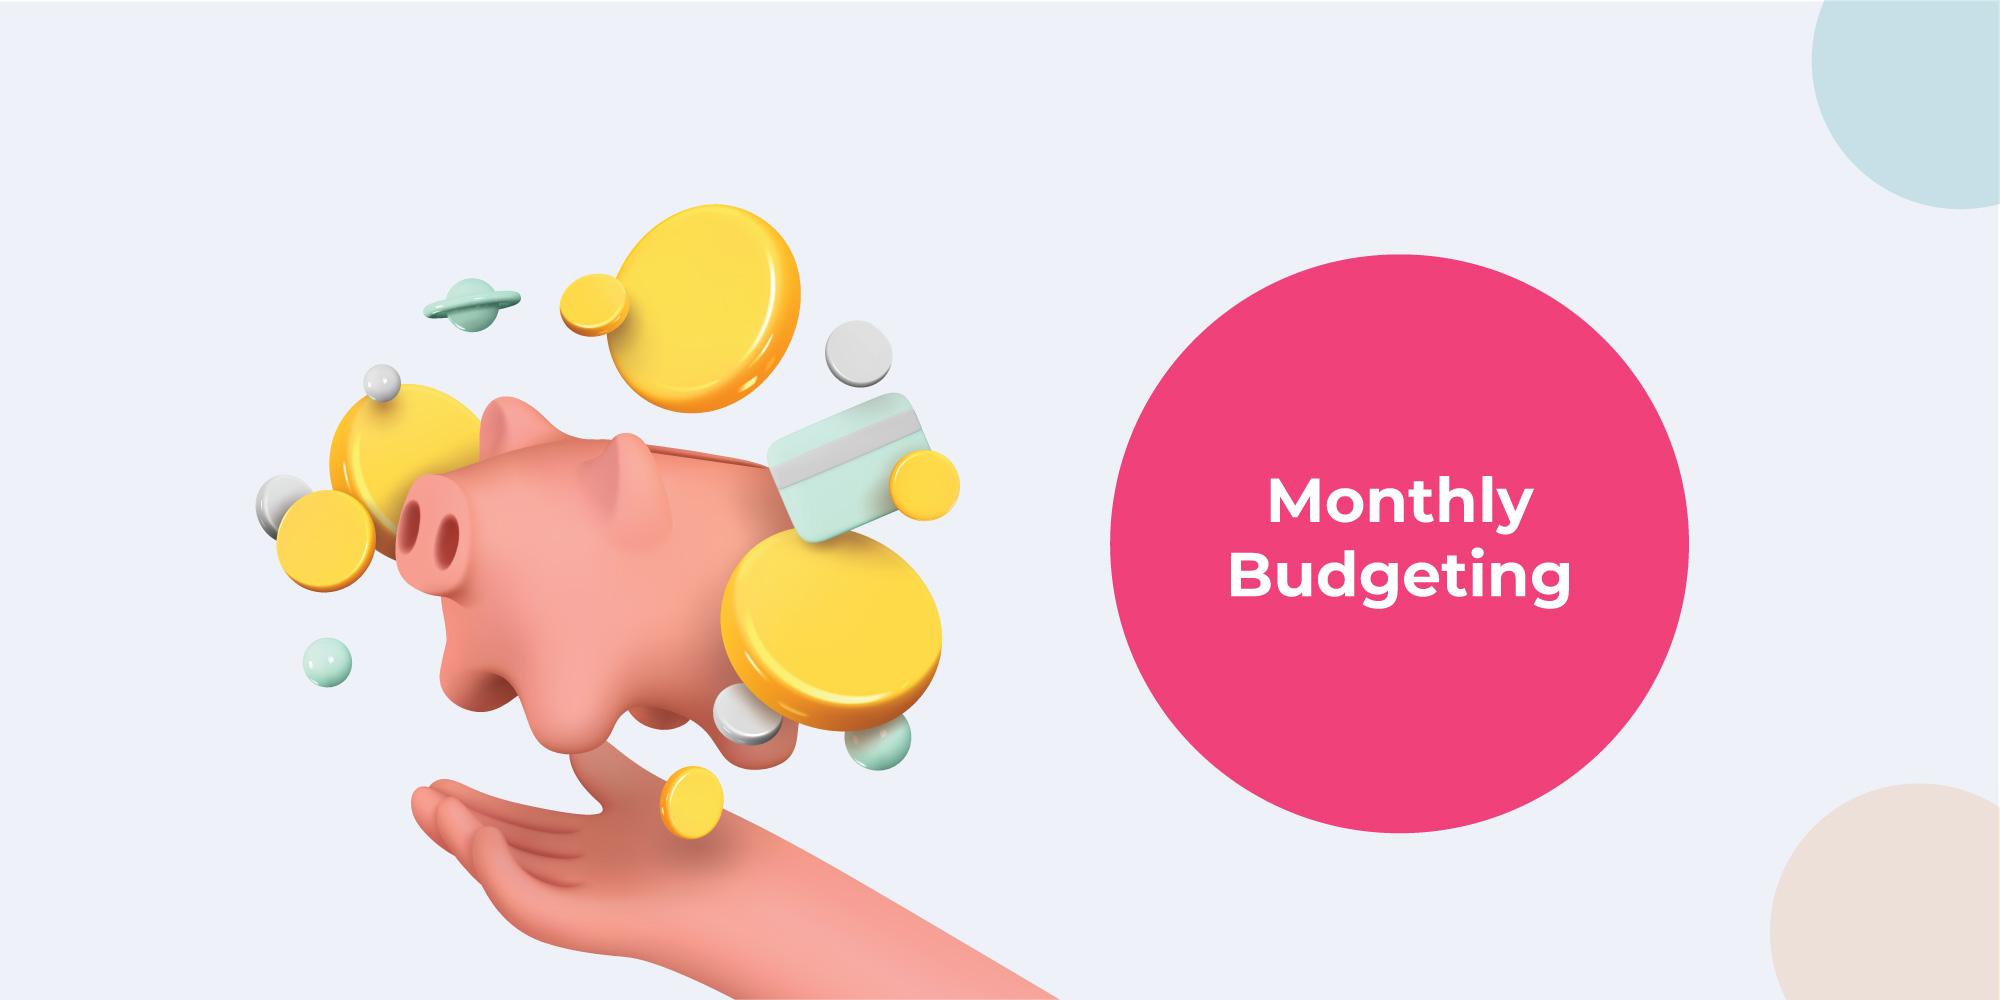 Budget planning tips to follow for better financial health